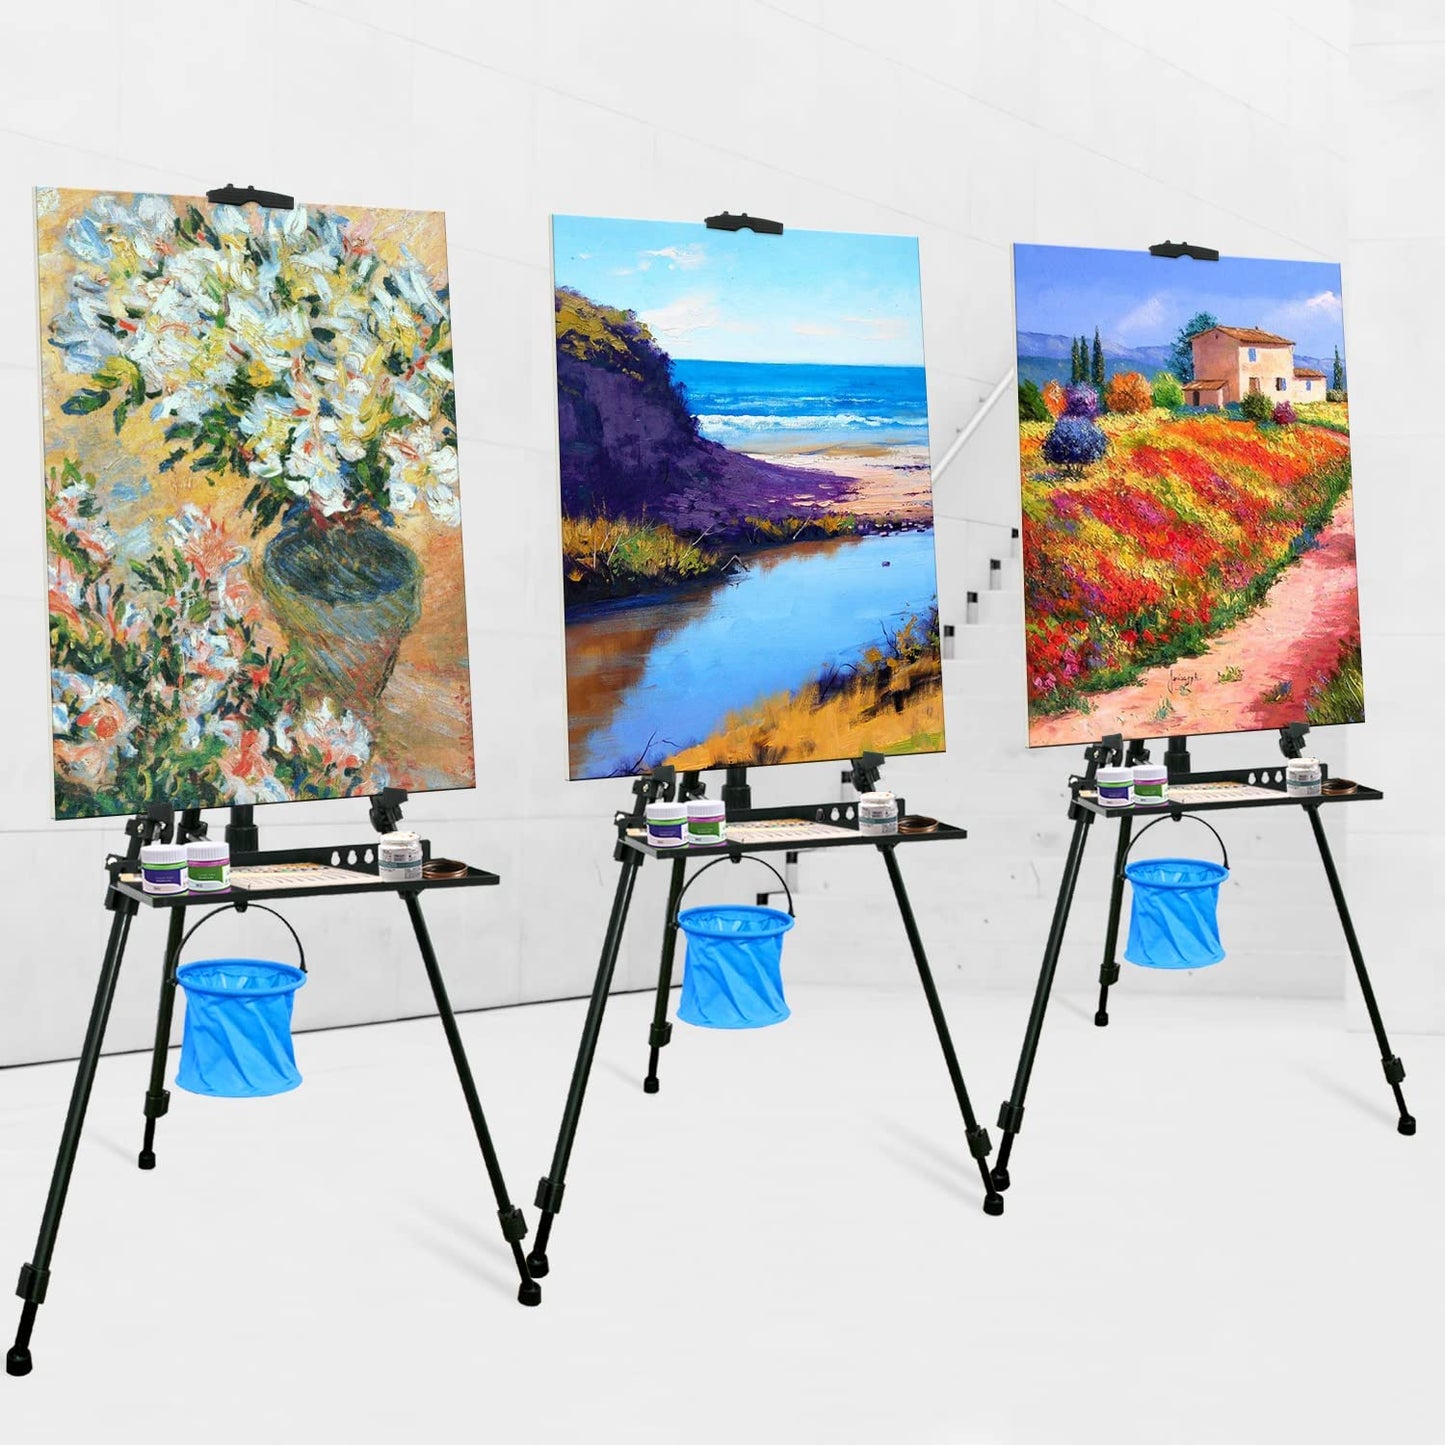 NewZeal Artist Easel Stand Painting Stand Art Easel, 20"to 61" Art Easel for Painting Canvase & Displaying, Aluminum Adjustable Height Display Tripod